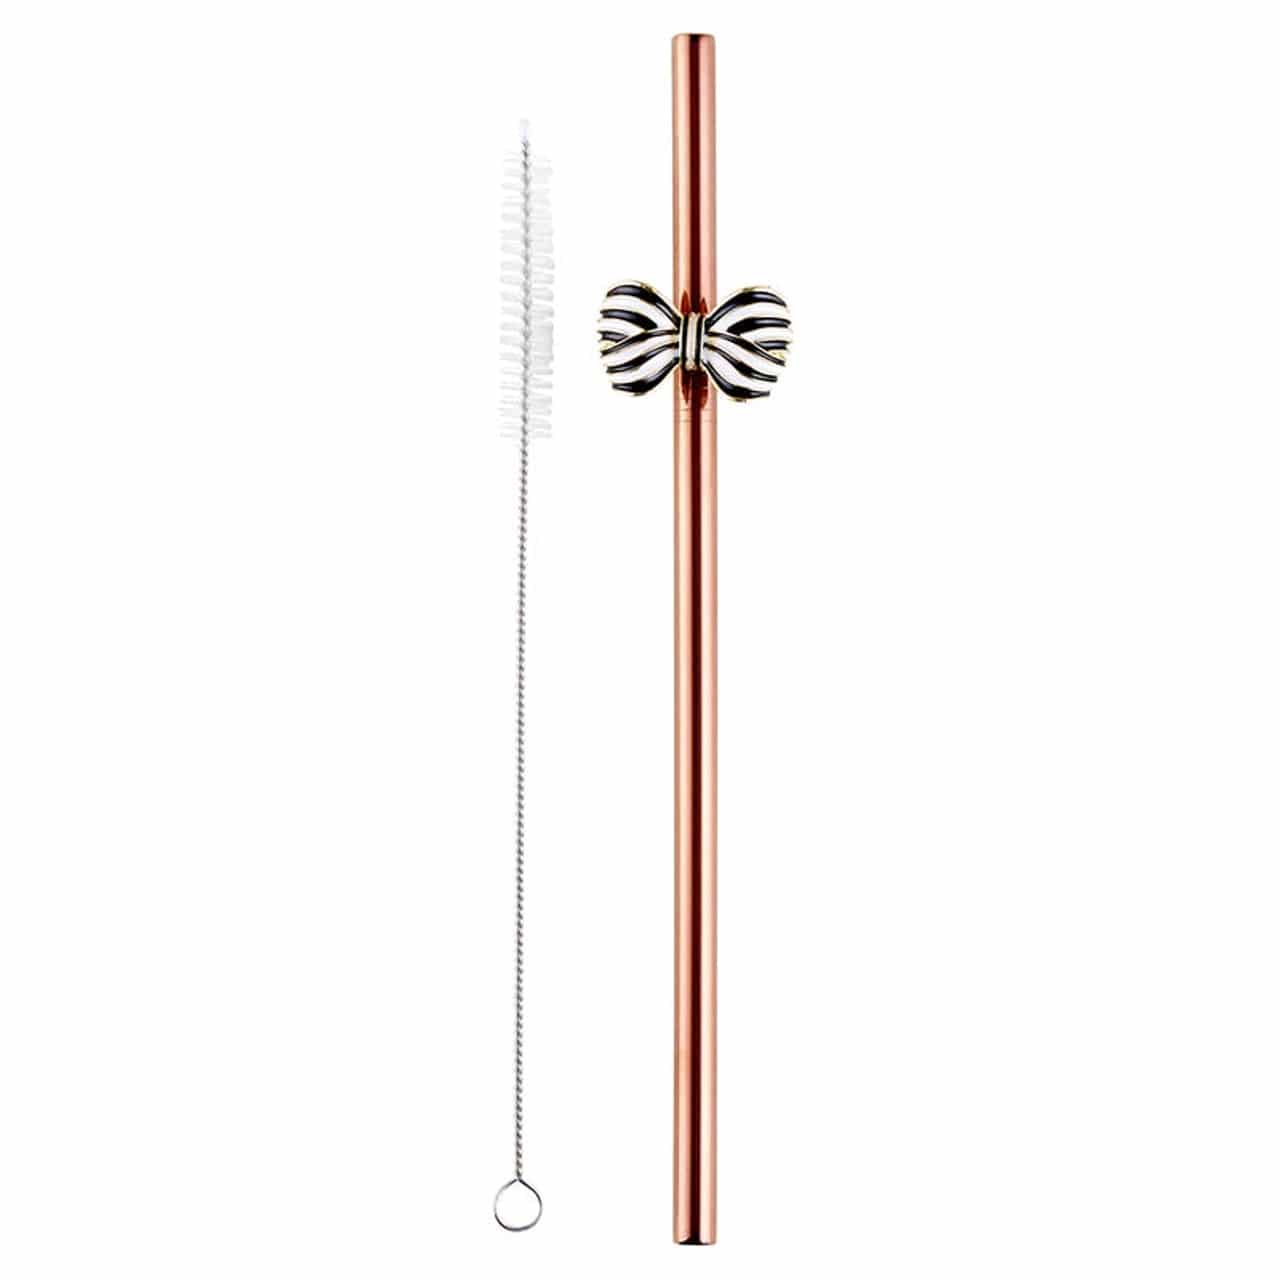 Creative Brands - Bow Straw Rose Gold - Findlay Rowe Designs